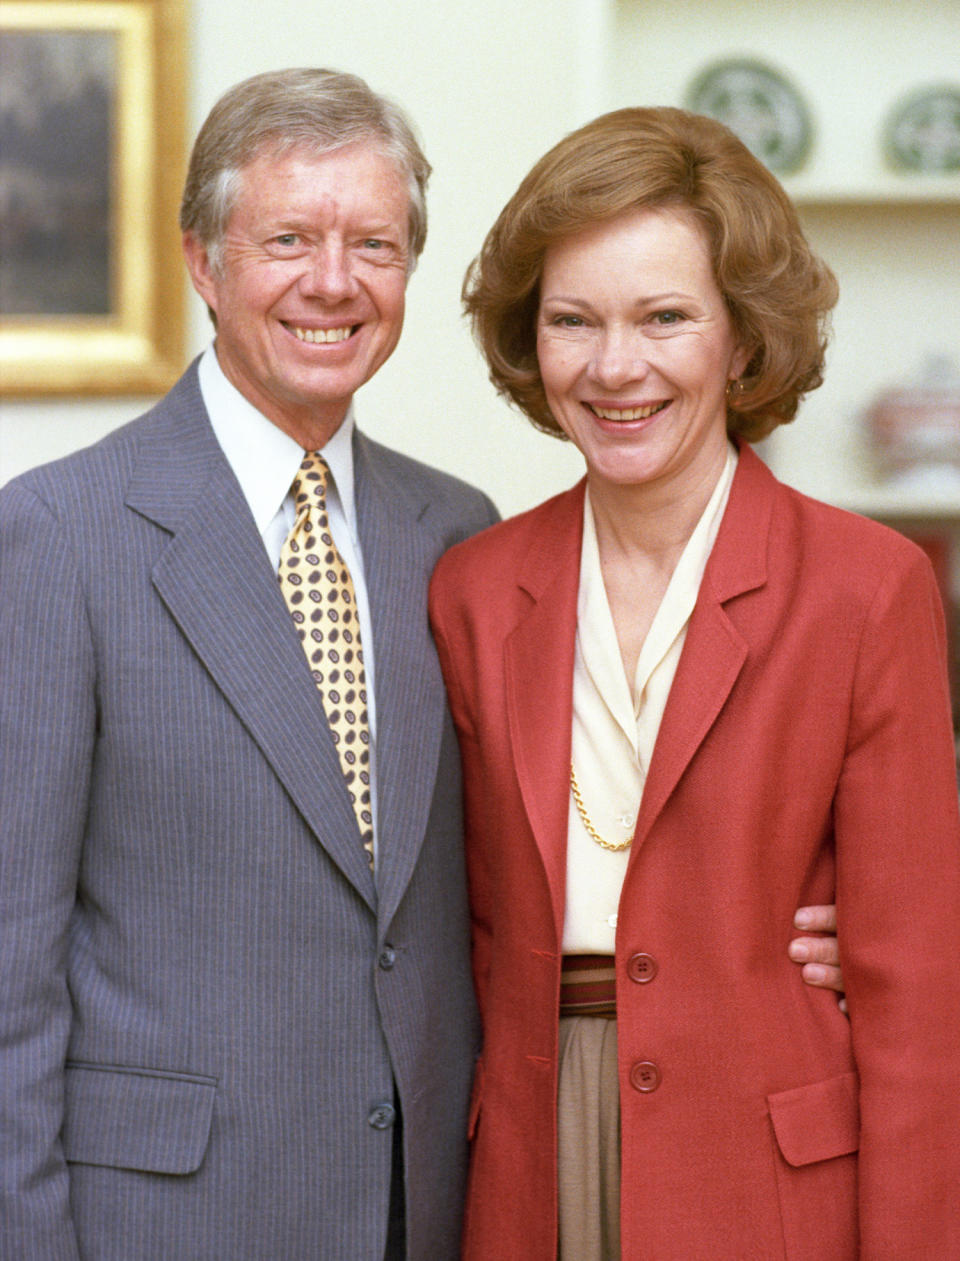 Then-U.S. President Jimmy Carter with wife Rosalynn Carter. (Universal History Archive / Getty Images)